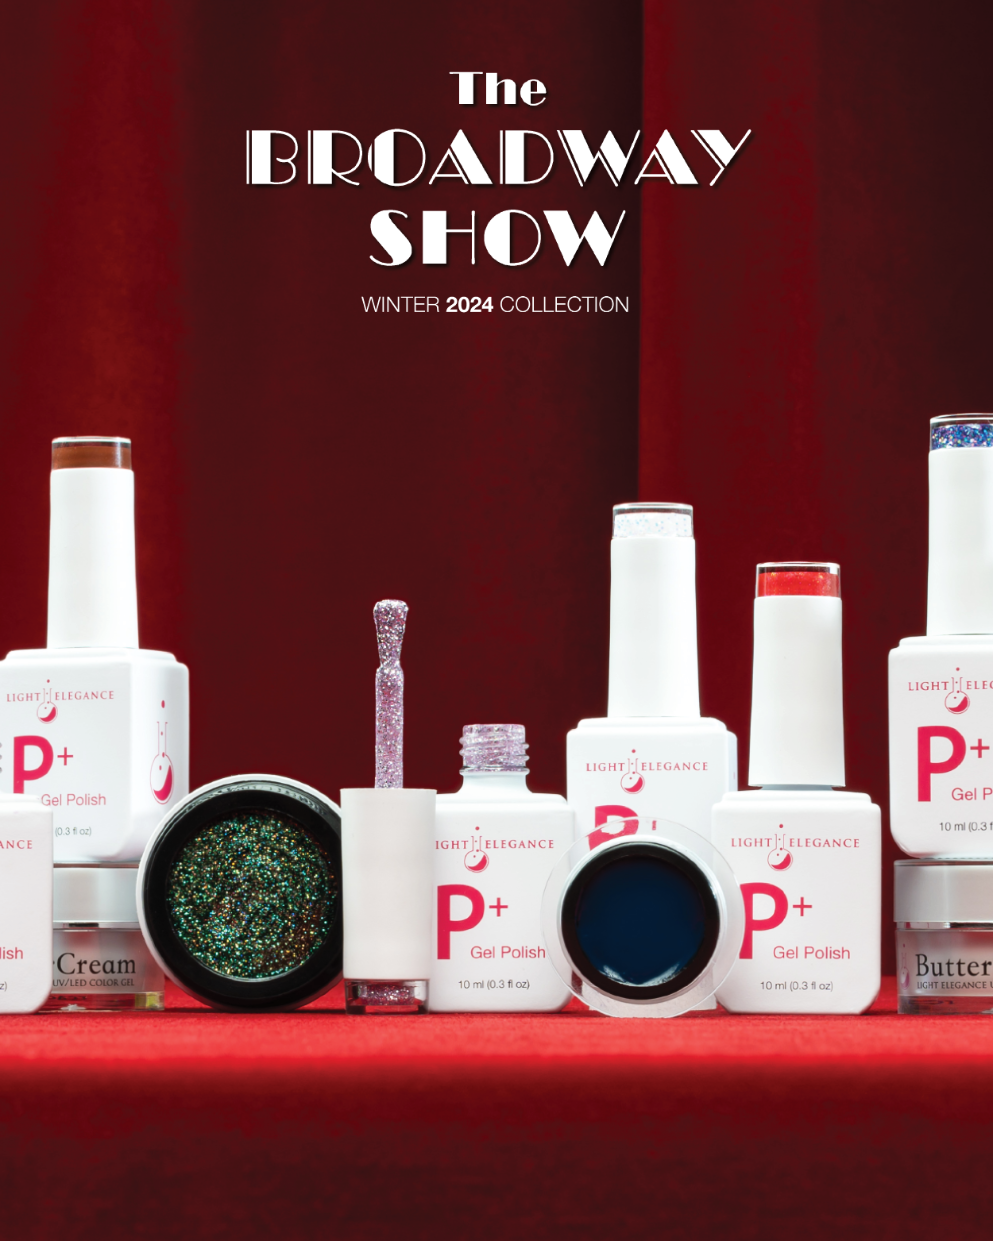 Light Elegance Winter 2024 Collection - The Broadway Show